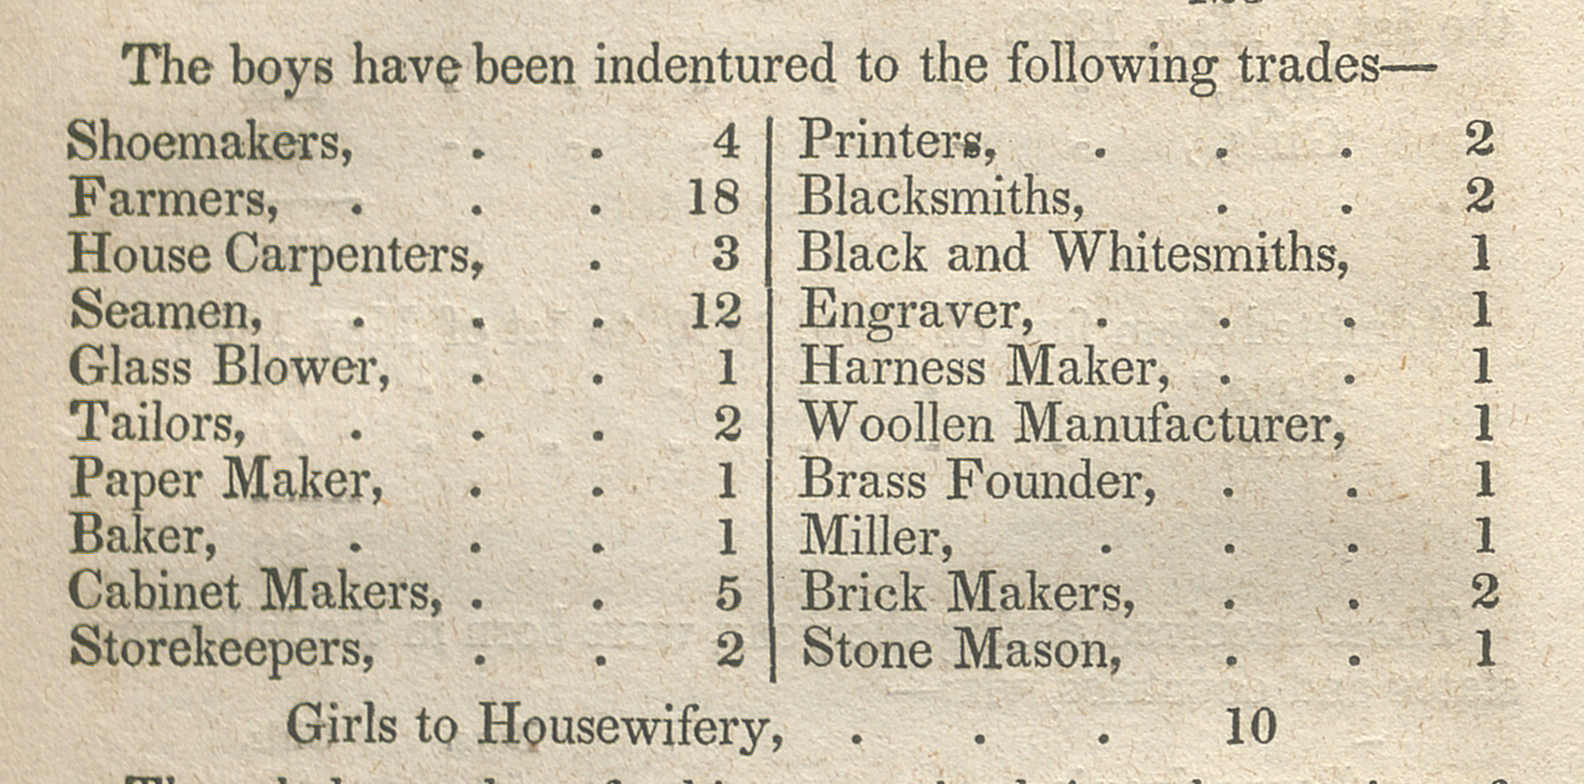 Trades and occupations that House of Refuge children were indentured in.